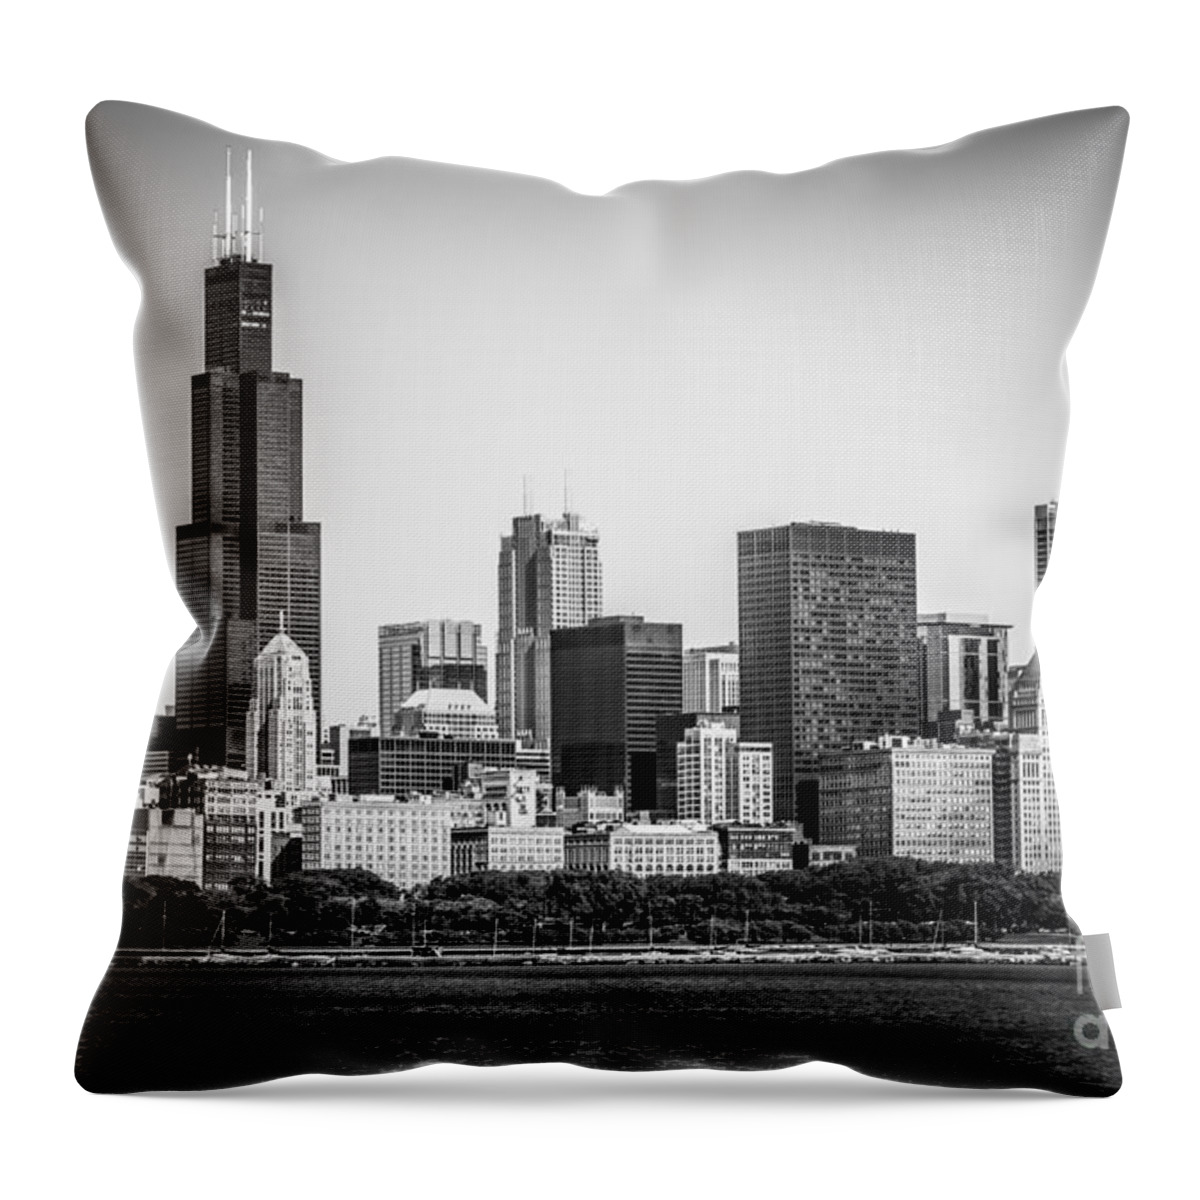 2010 Throw Pillow featuring the photograph Chicago Skyline with Sears Tower in Black and White by Paul Velgos